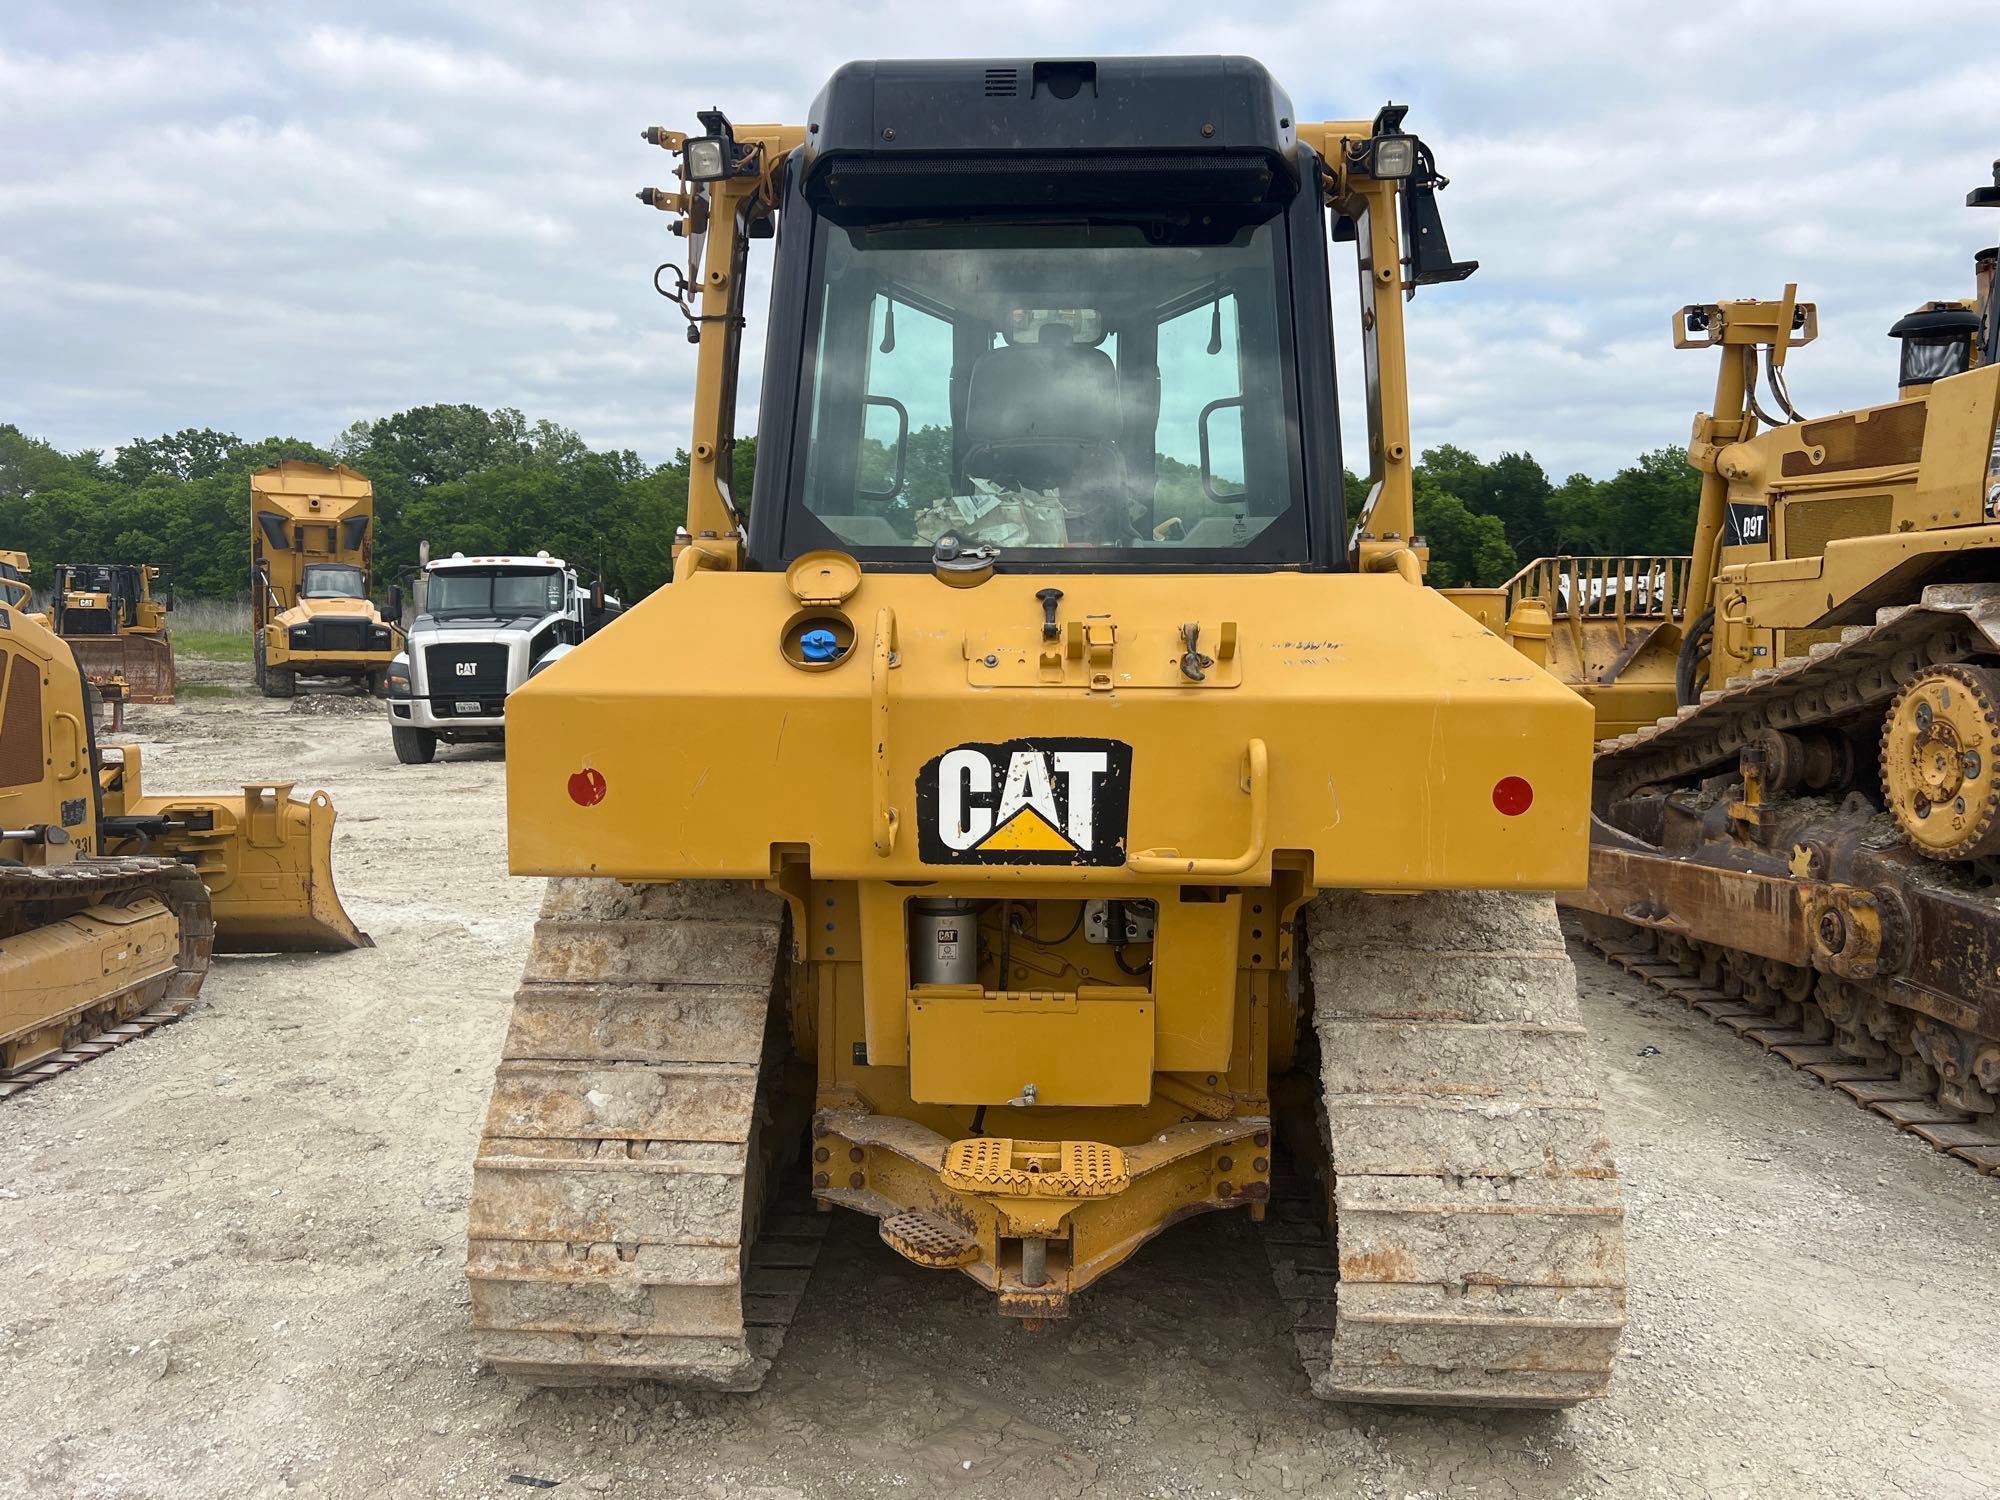 2017 CAT D6NXL CRAWLER TRACTOR SN:NJN00151 powered by Cat diesel engine, equipped with EROPS, air,